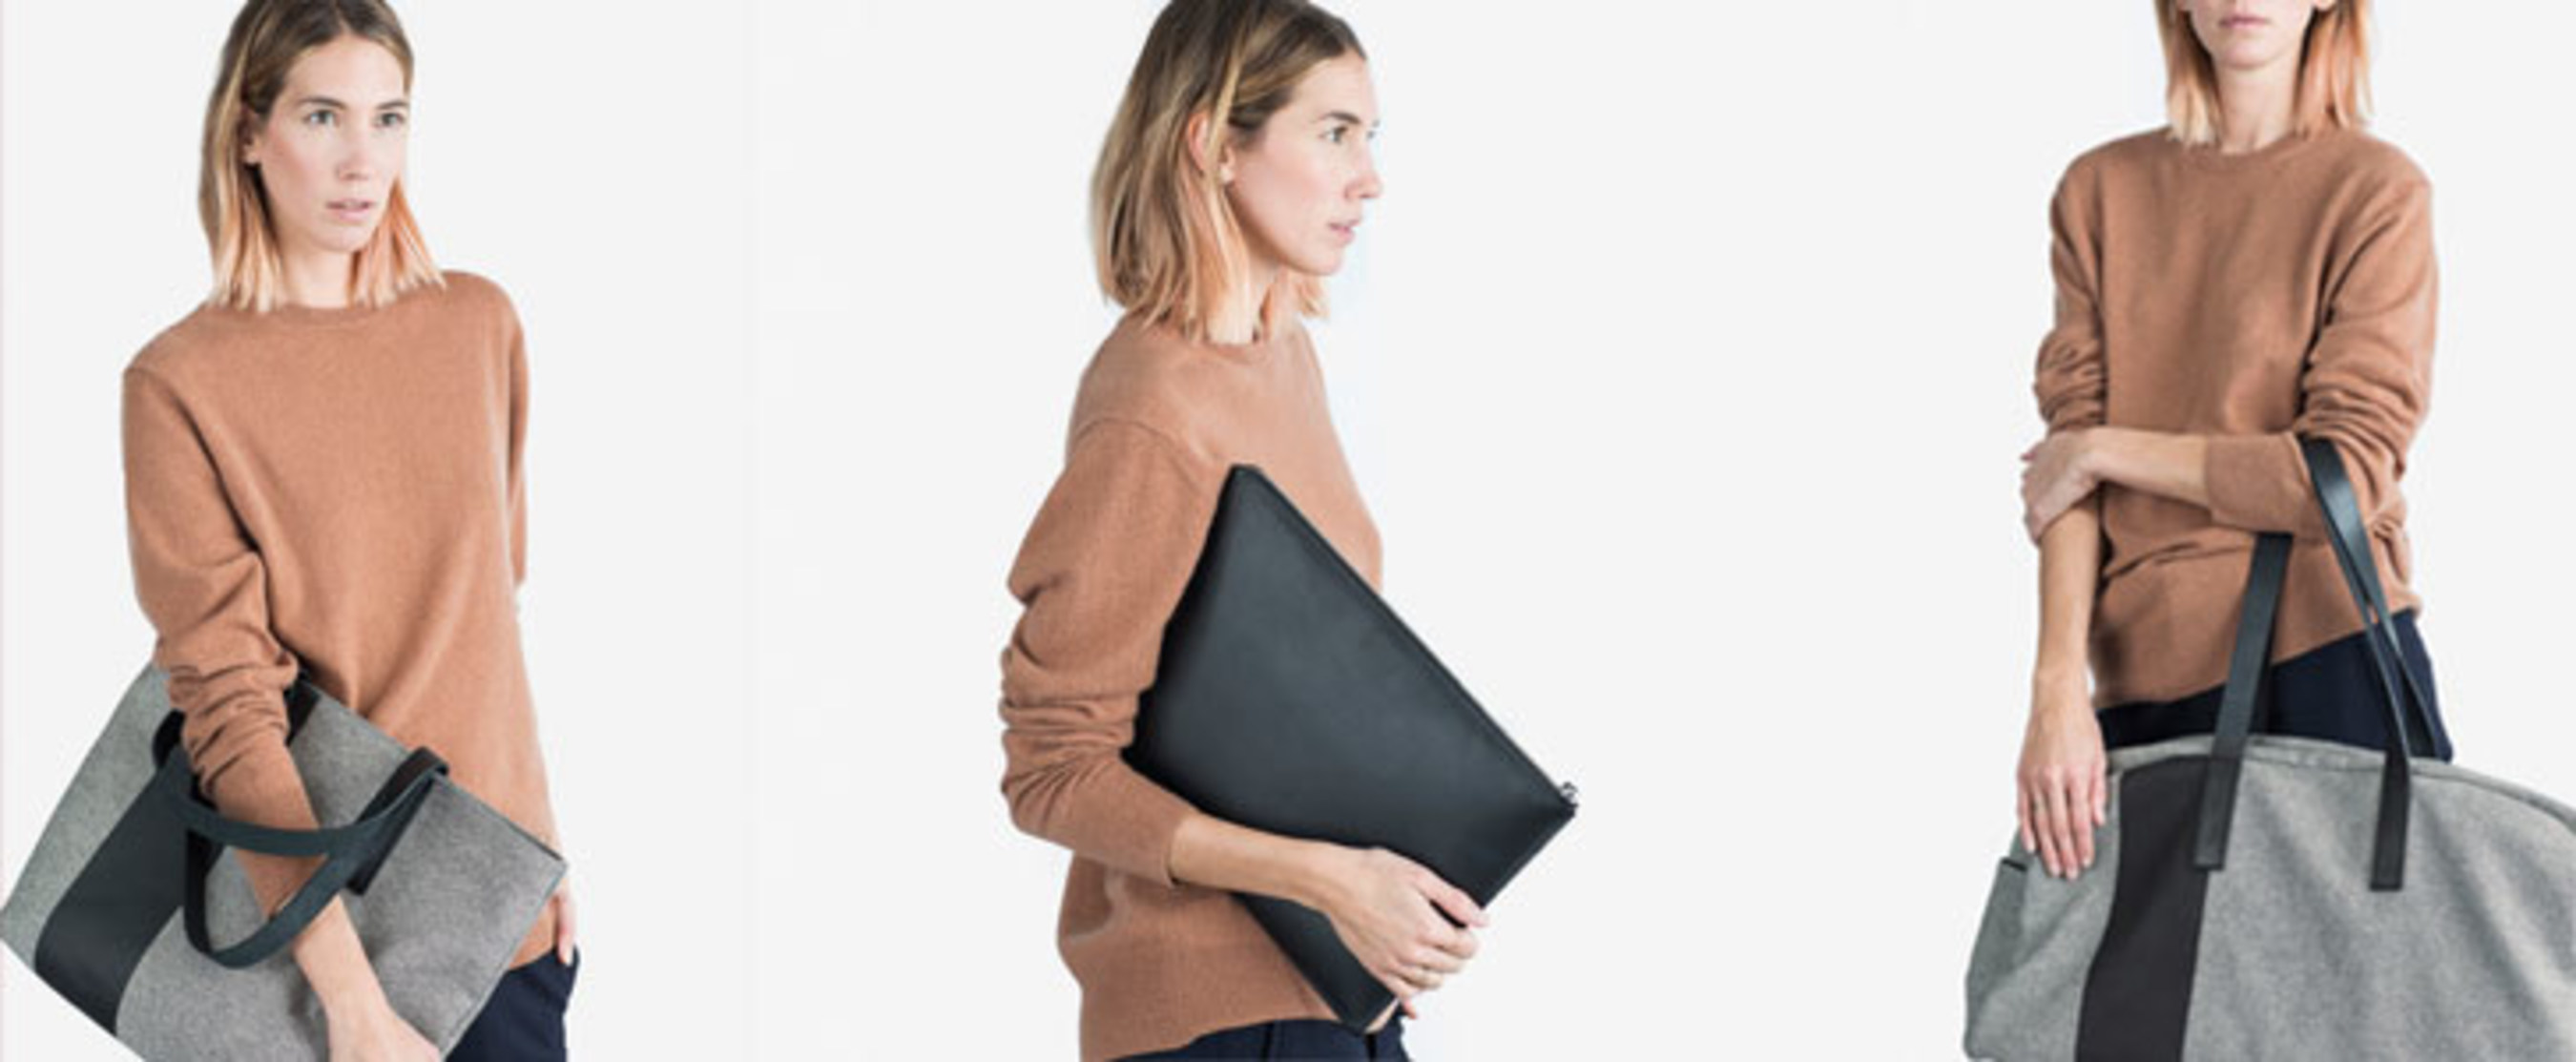 Everlane for ShopStyle collection.